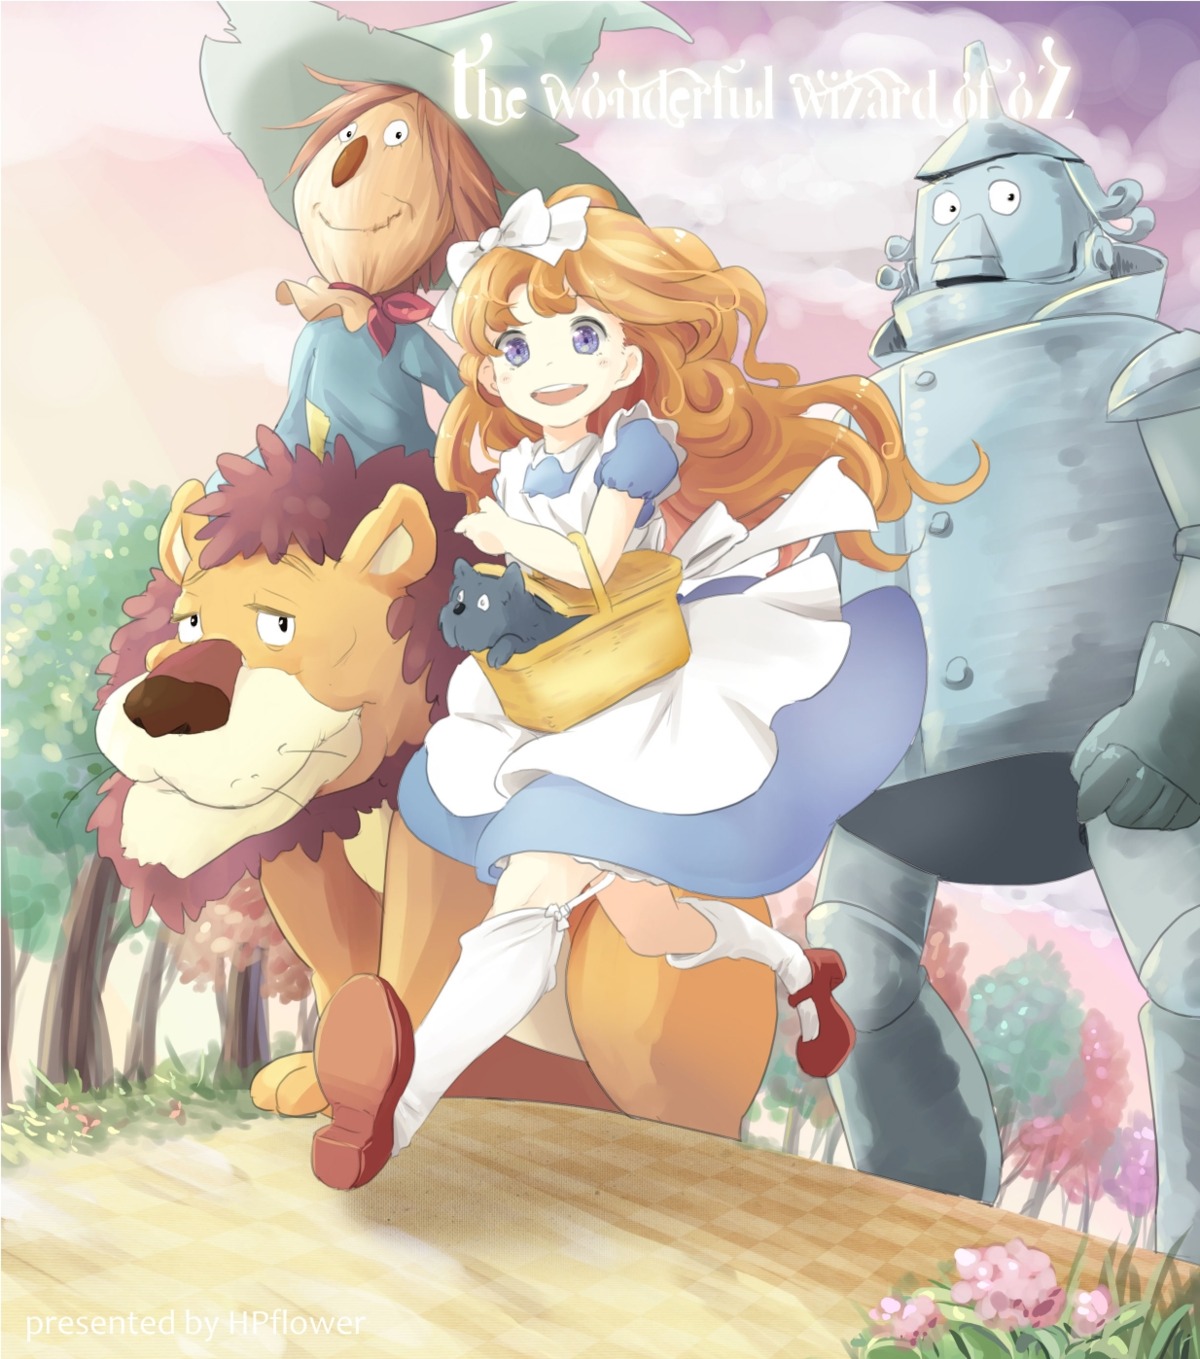 cowardly_lion dorothy_gale dress hpflower scarecrow stockings the_wizard_of_oz thighhighs tin_man toto